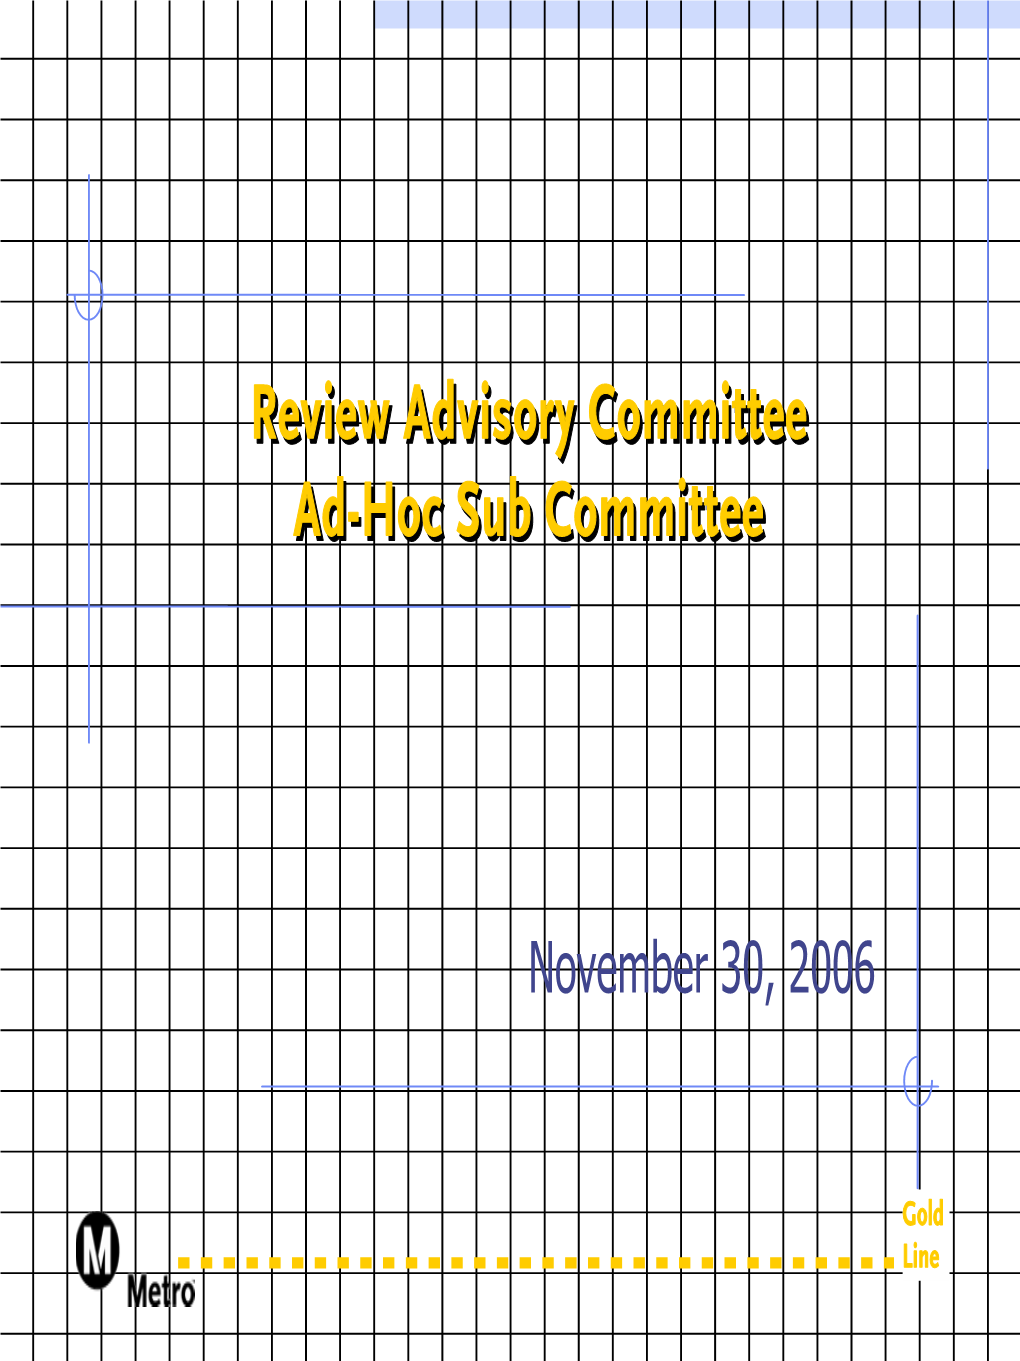 Ad-Hoc Sub Committee Convened for the First Time on February 23, 2006